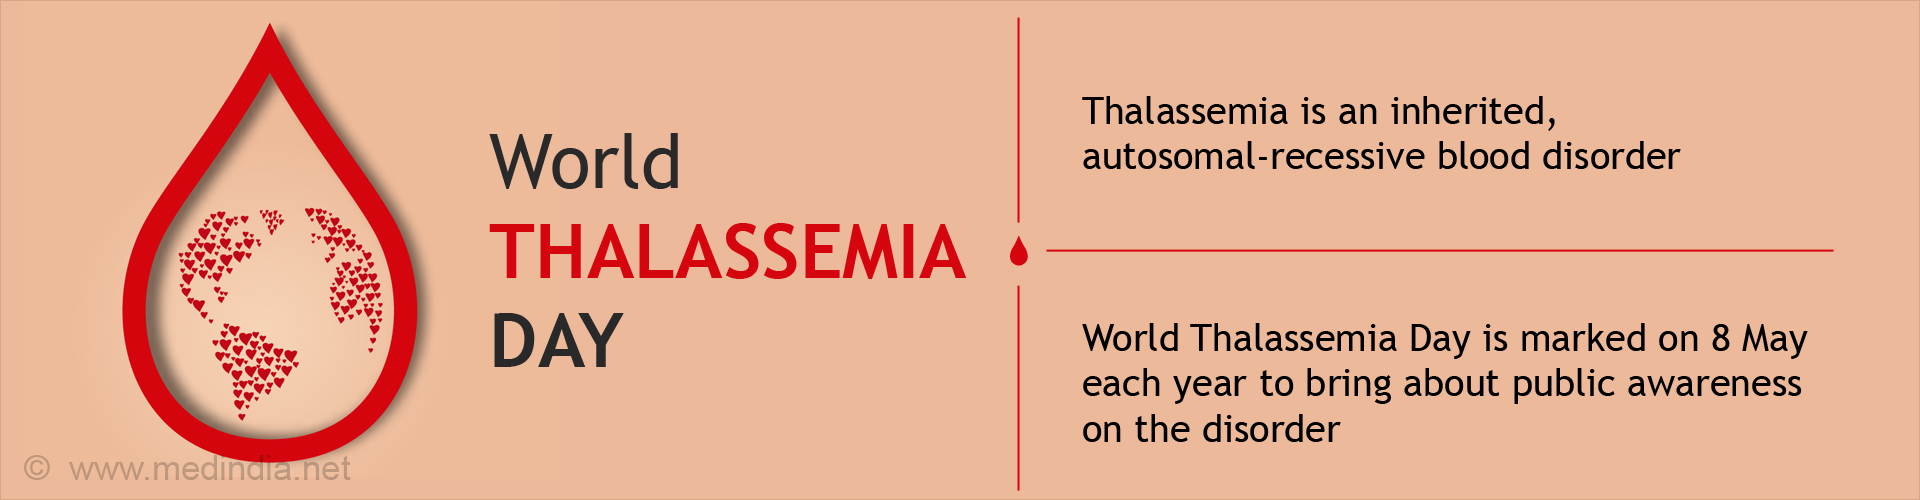 World Thalassemia Day
- Thalassemia is an inherited autosomal-recessive blood disorder
- World Thalassemia Day is marked on 8 May each year to bring about public awareness